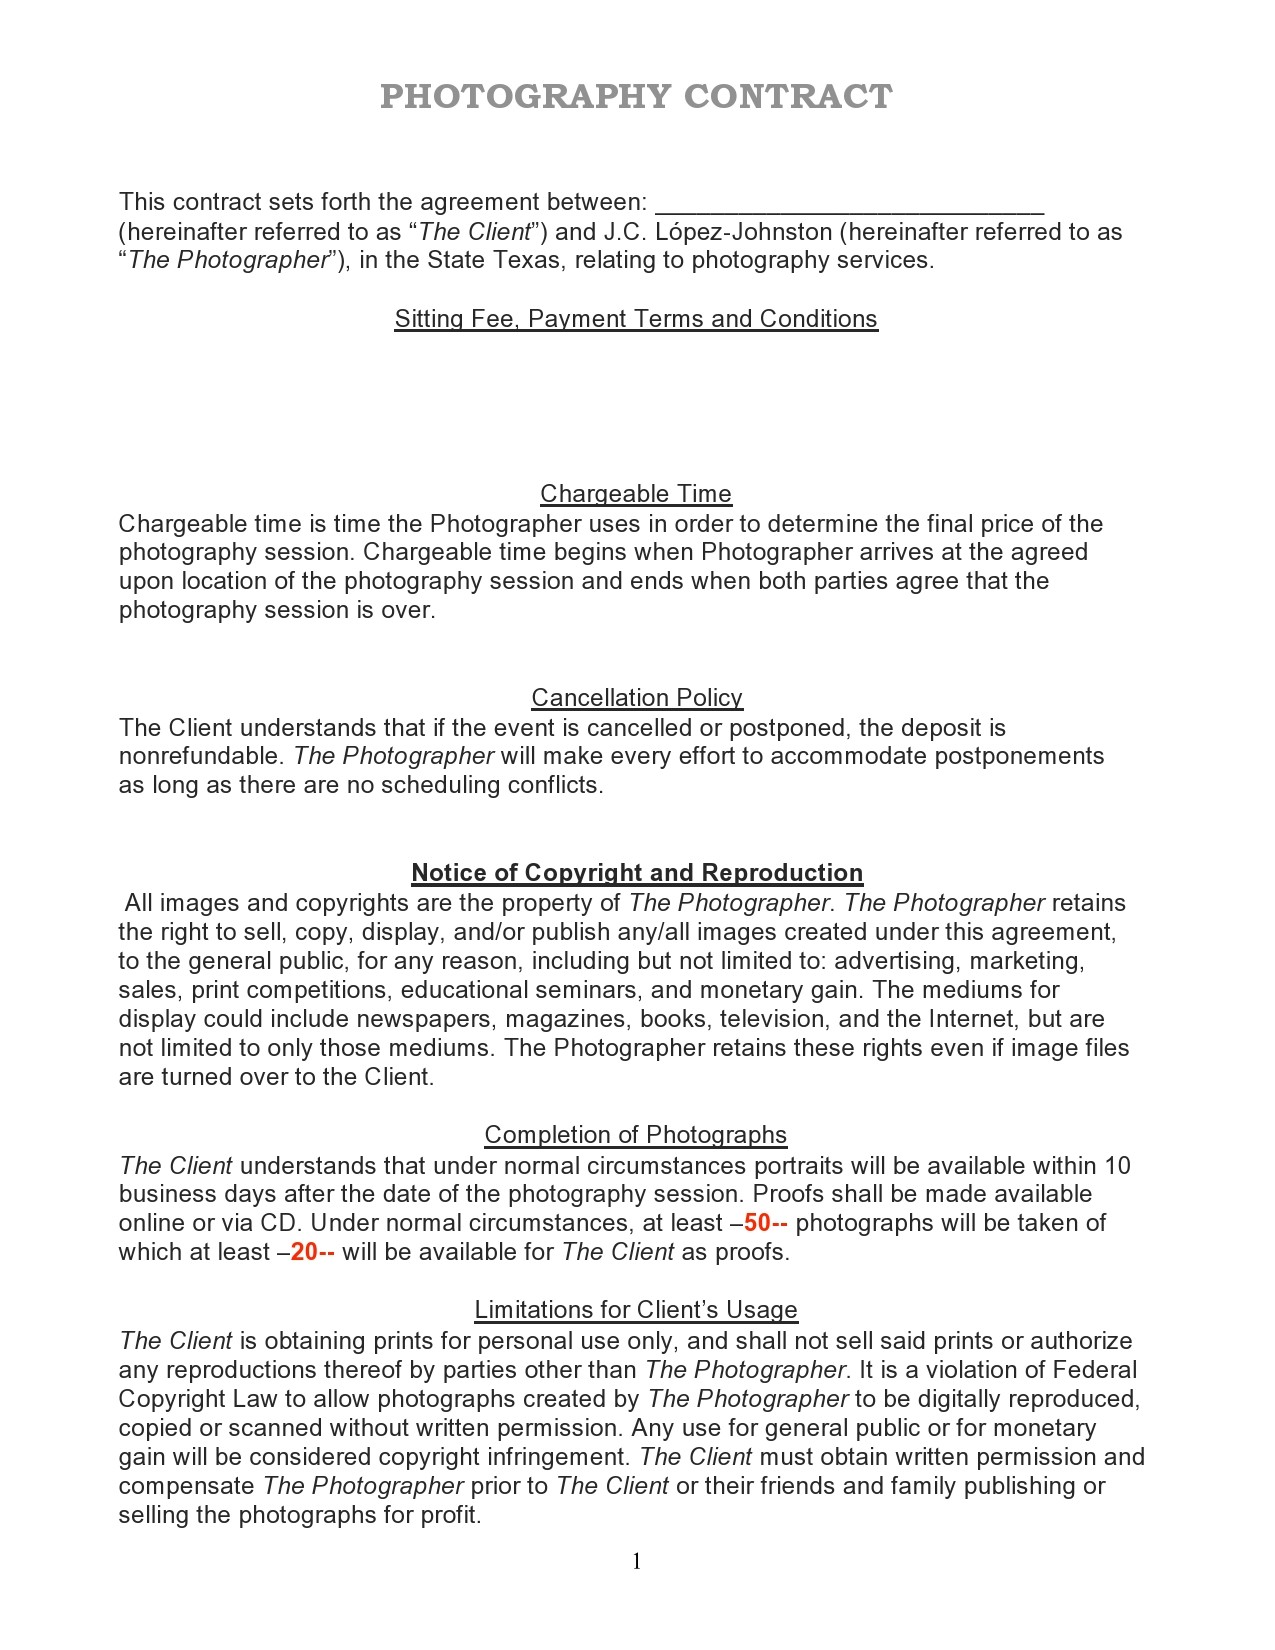 Free photography contract template 06